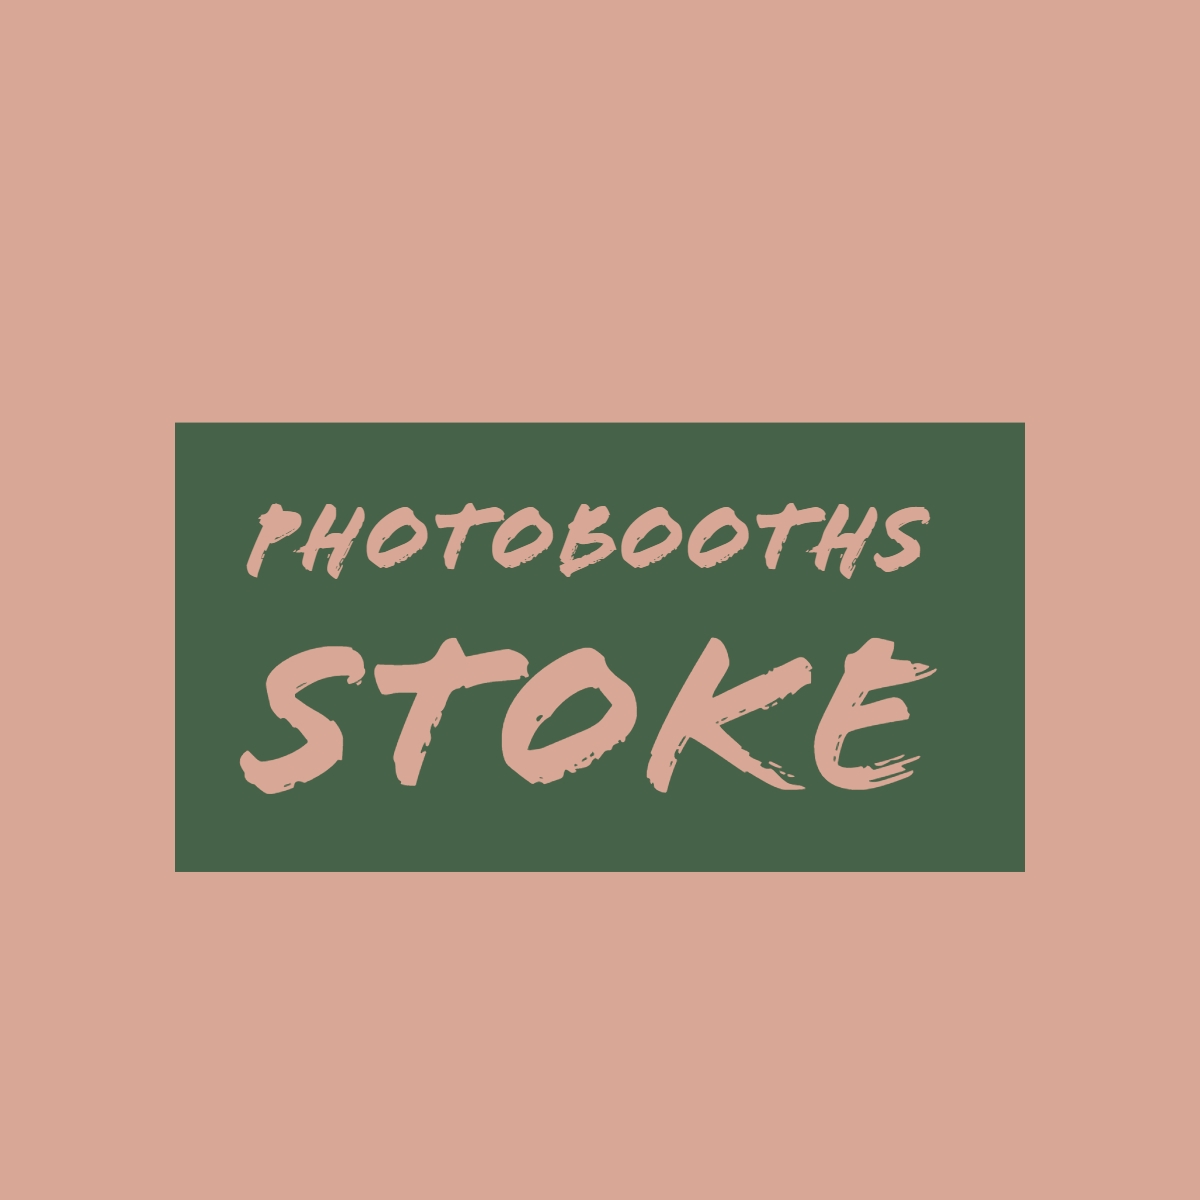 Photo Booths Stoke